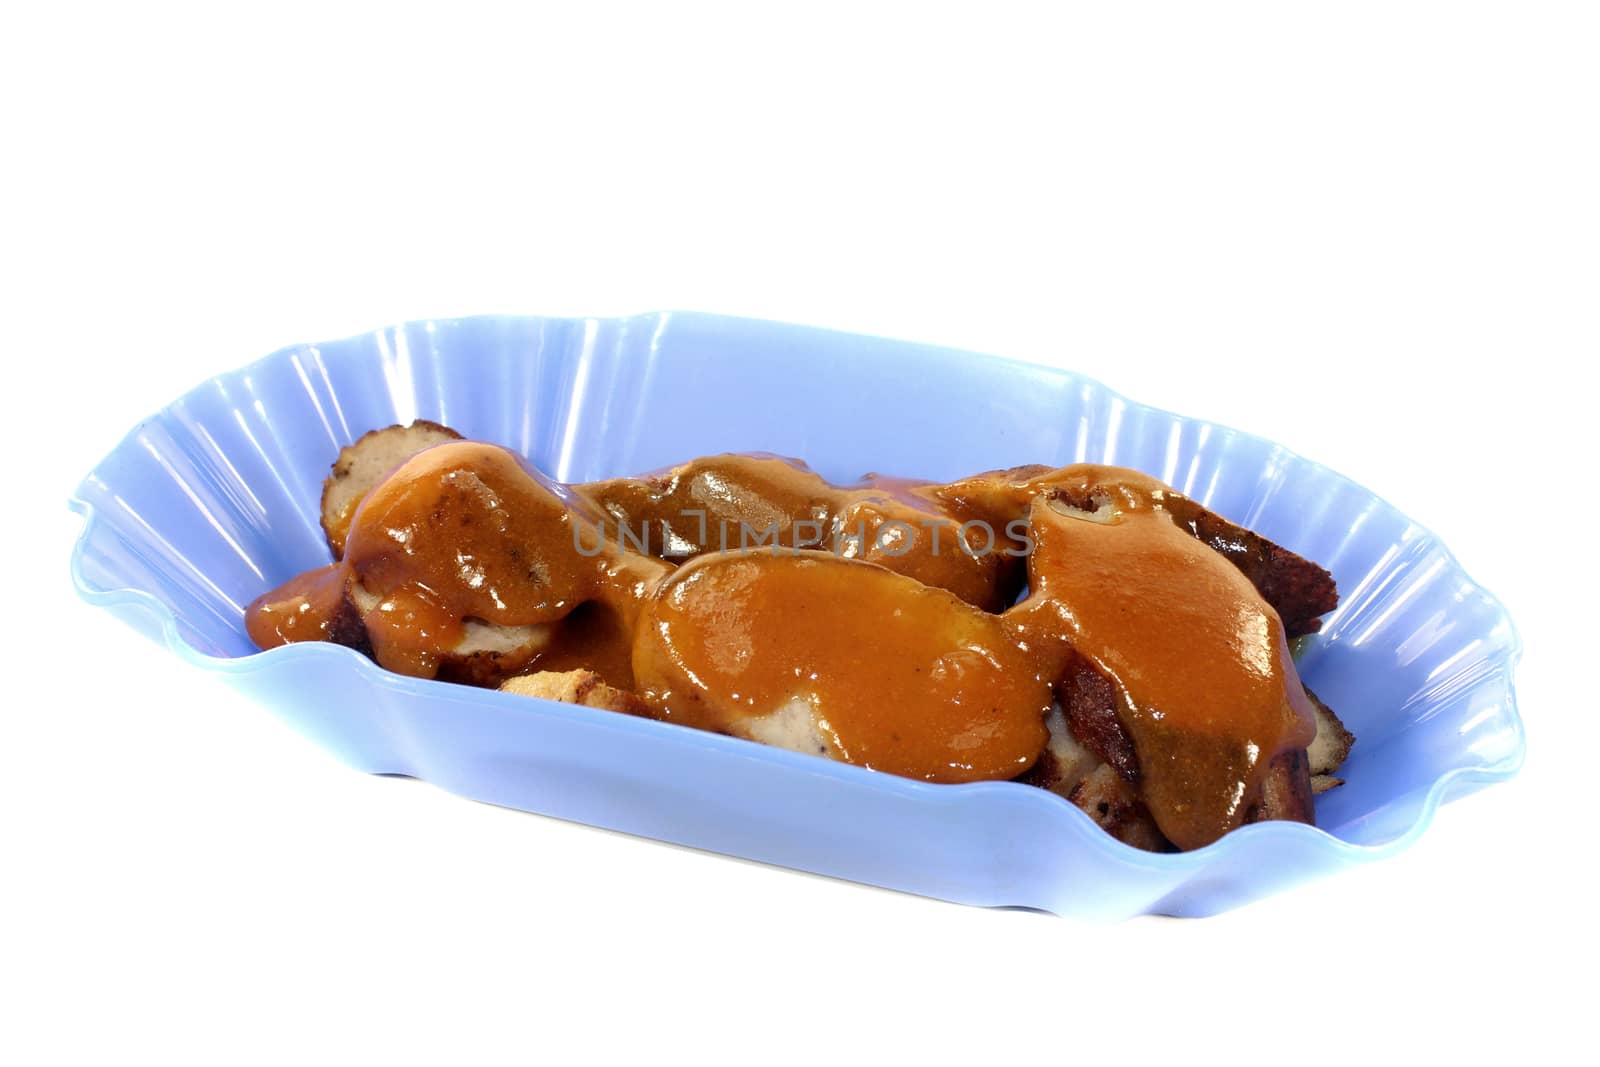 Sausage with curry in a bowl on a light background